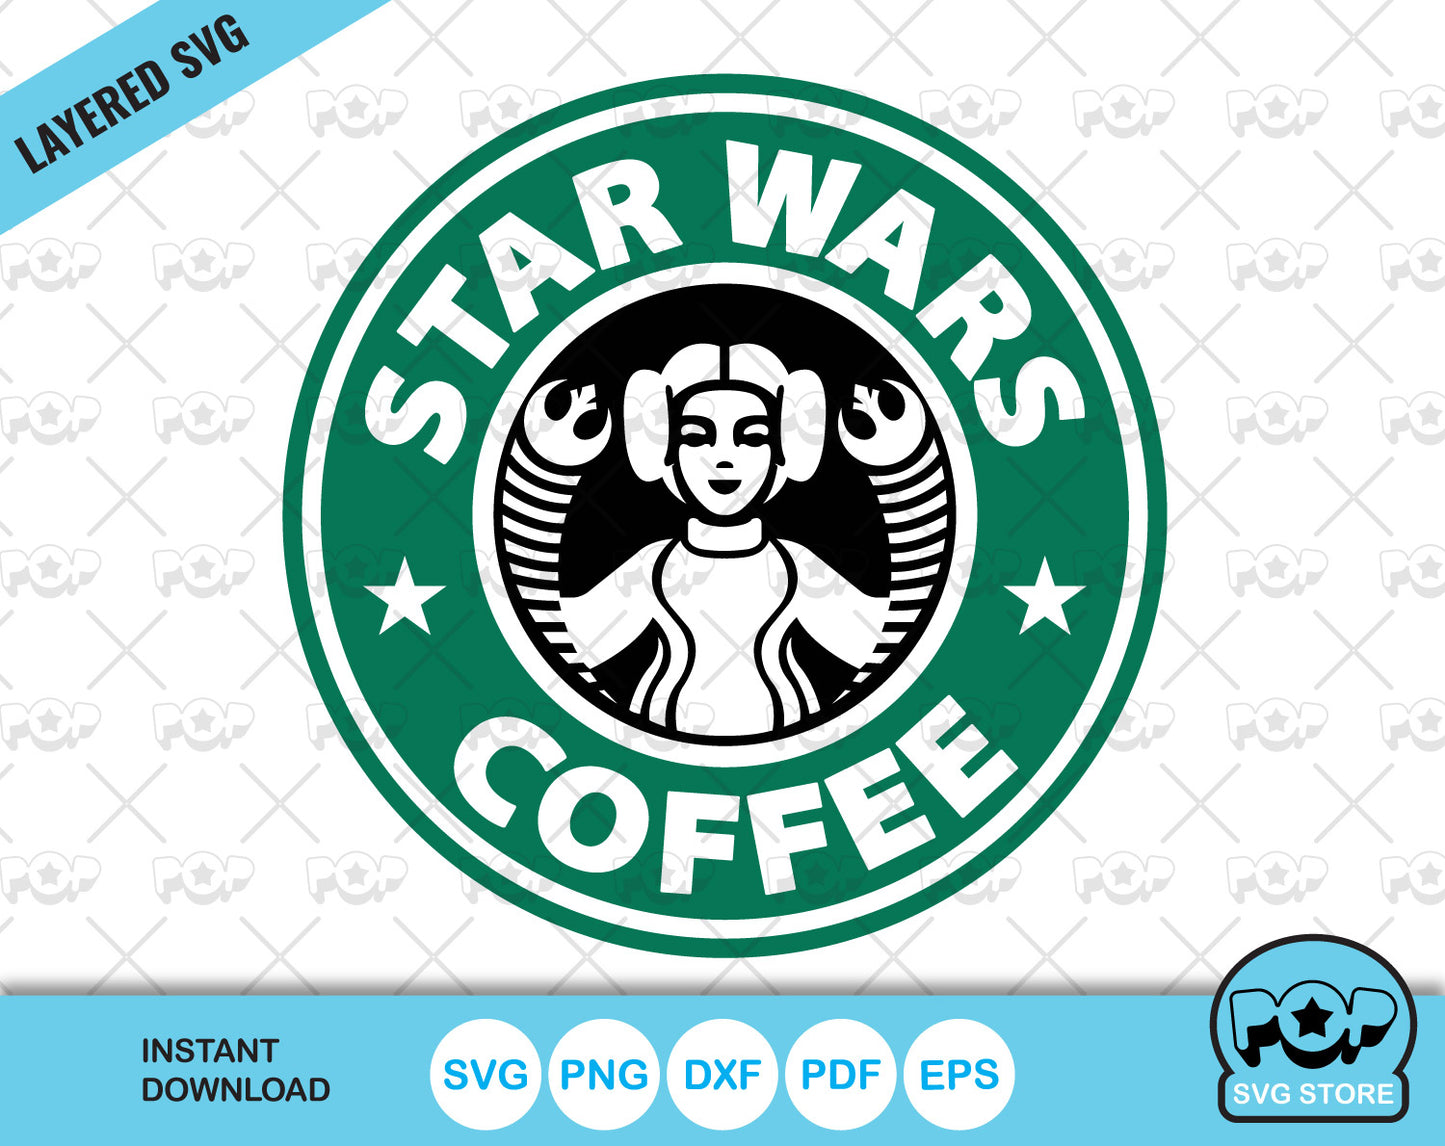 Starbucks Princess Leia clipart, Star Wars Coffee clipart, Starbucks Star Wars SVG cut files for cricut silhouette, SVG, PNG, DXF, instant download